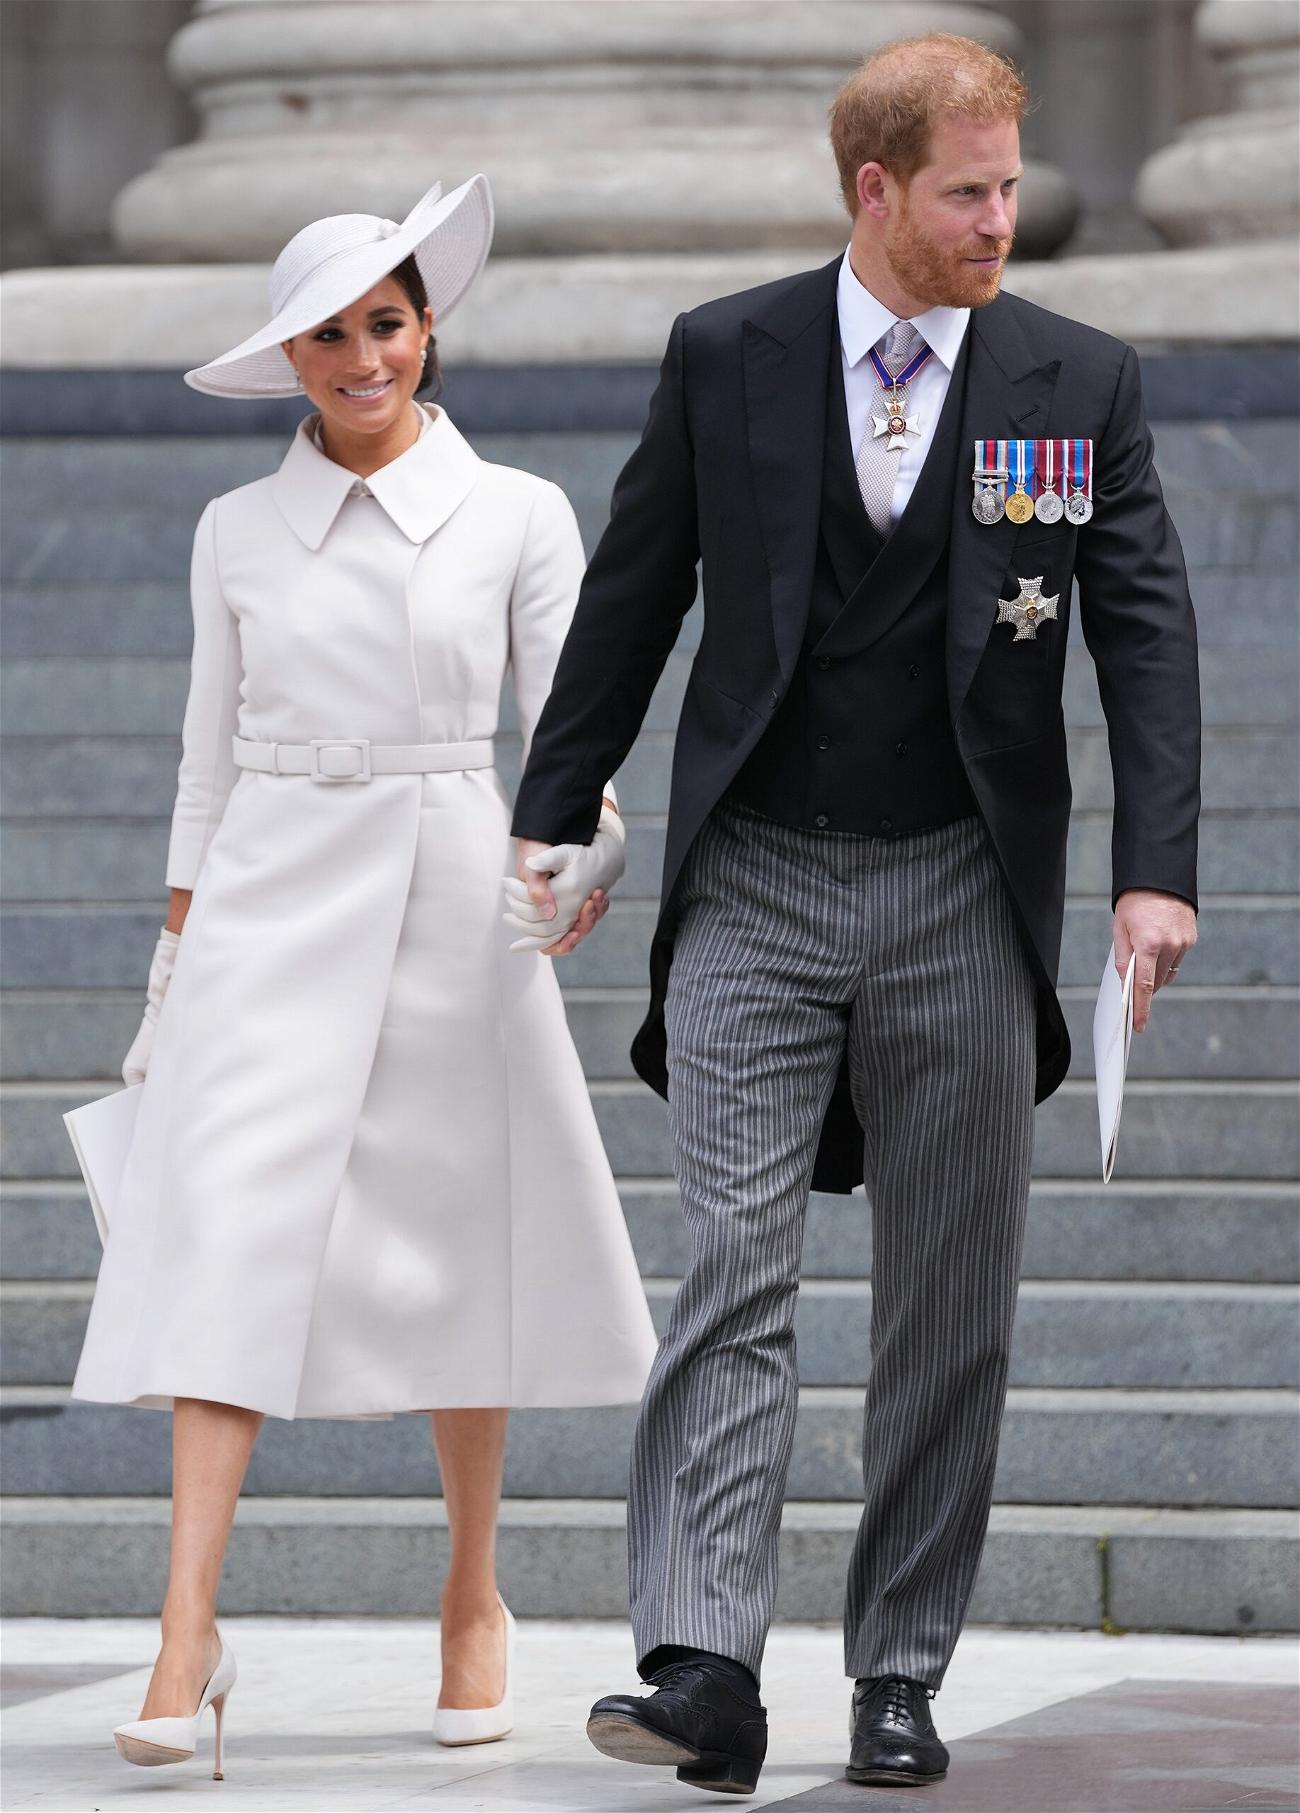 Prince Harry Duke of Sussex and Meghan Markle Duchess of Sussex attending the Service of Thanksgiving for the Queen, marking the monarch's 70 year Platinum Jubilee, at St Paul’s Cathedral in London. 03 Jun 2022 